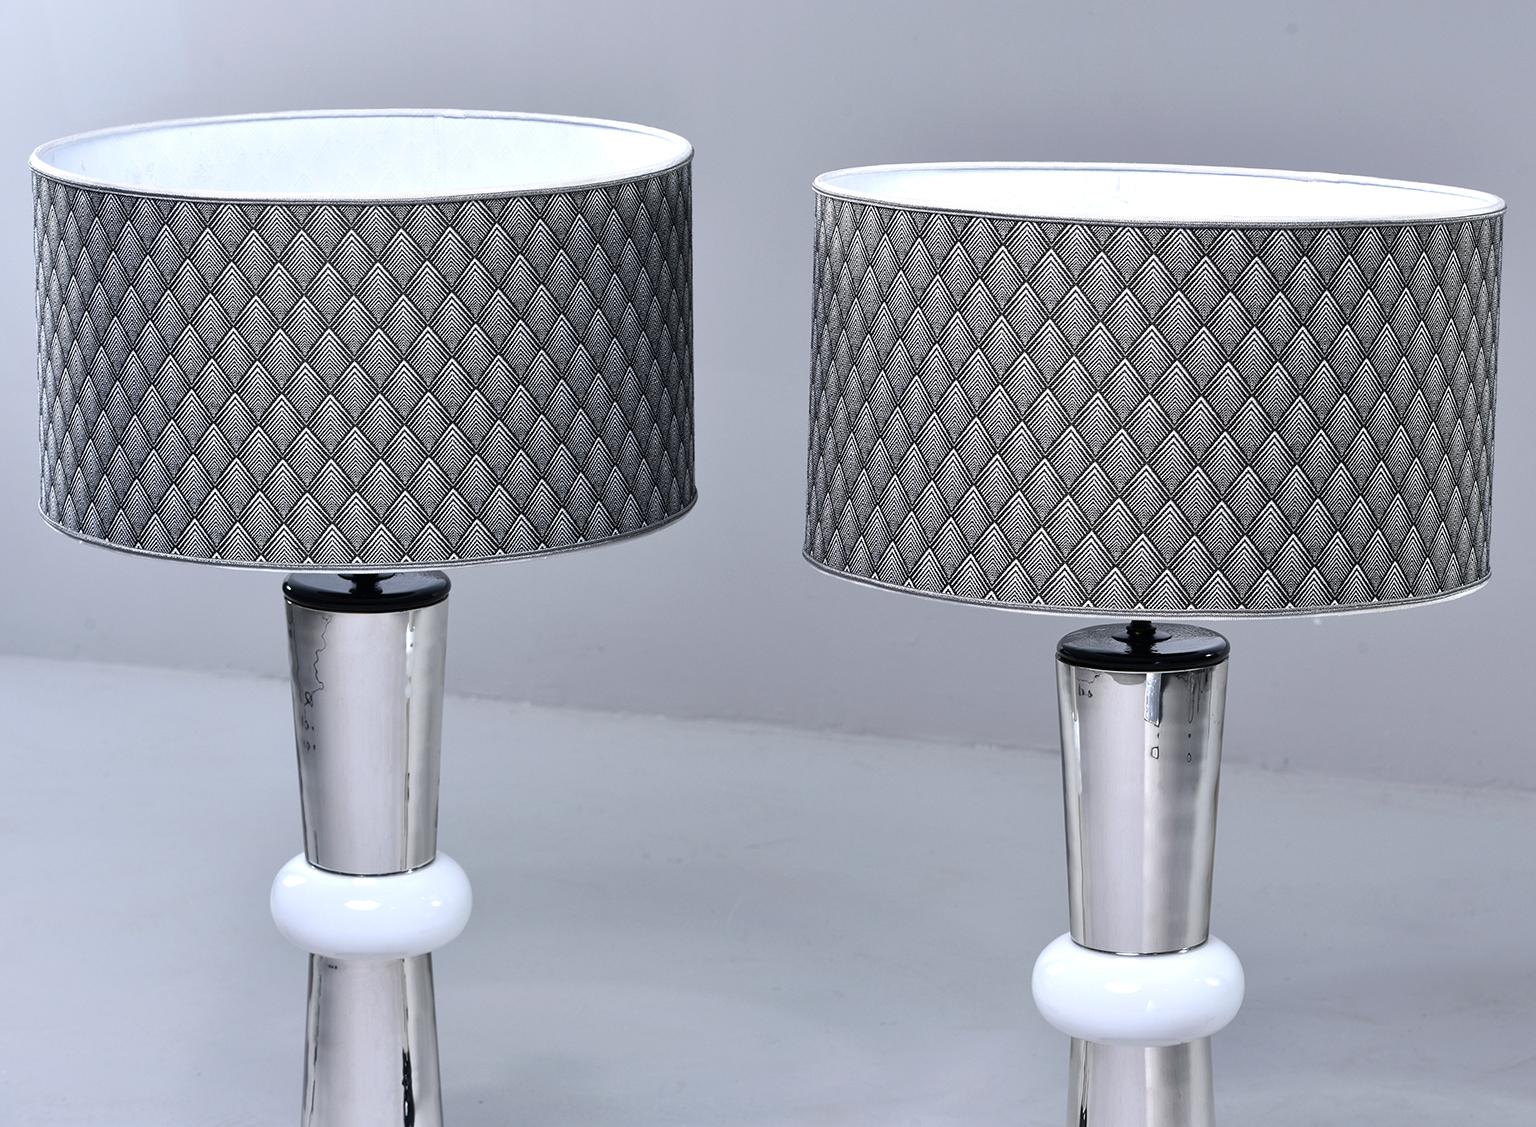 Pair of Italian glass lamps feature a black glass base and silver glass columns accented with white glass rings, circa 1980s. Fabric shades are included and have black and white woven chevron pattern. Sold and priced as a pair. New wiring for US